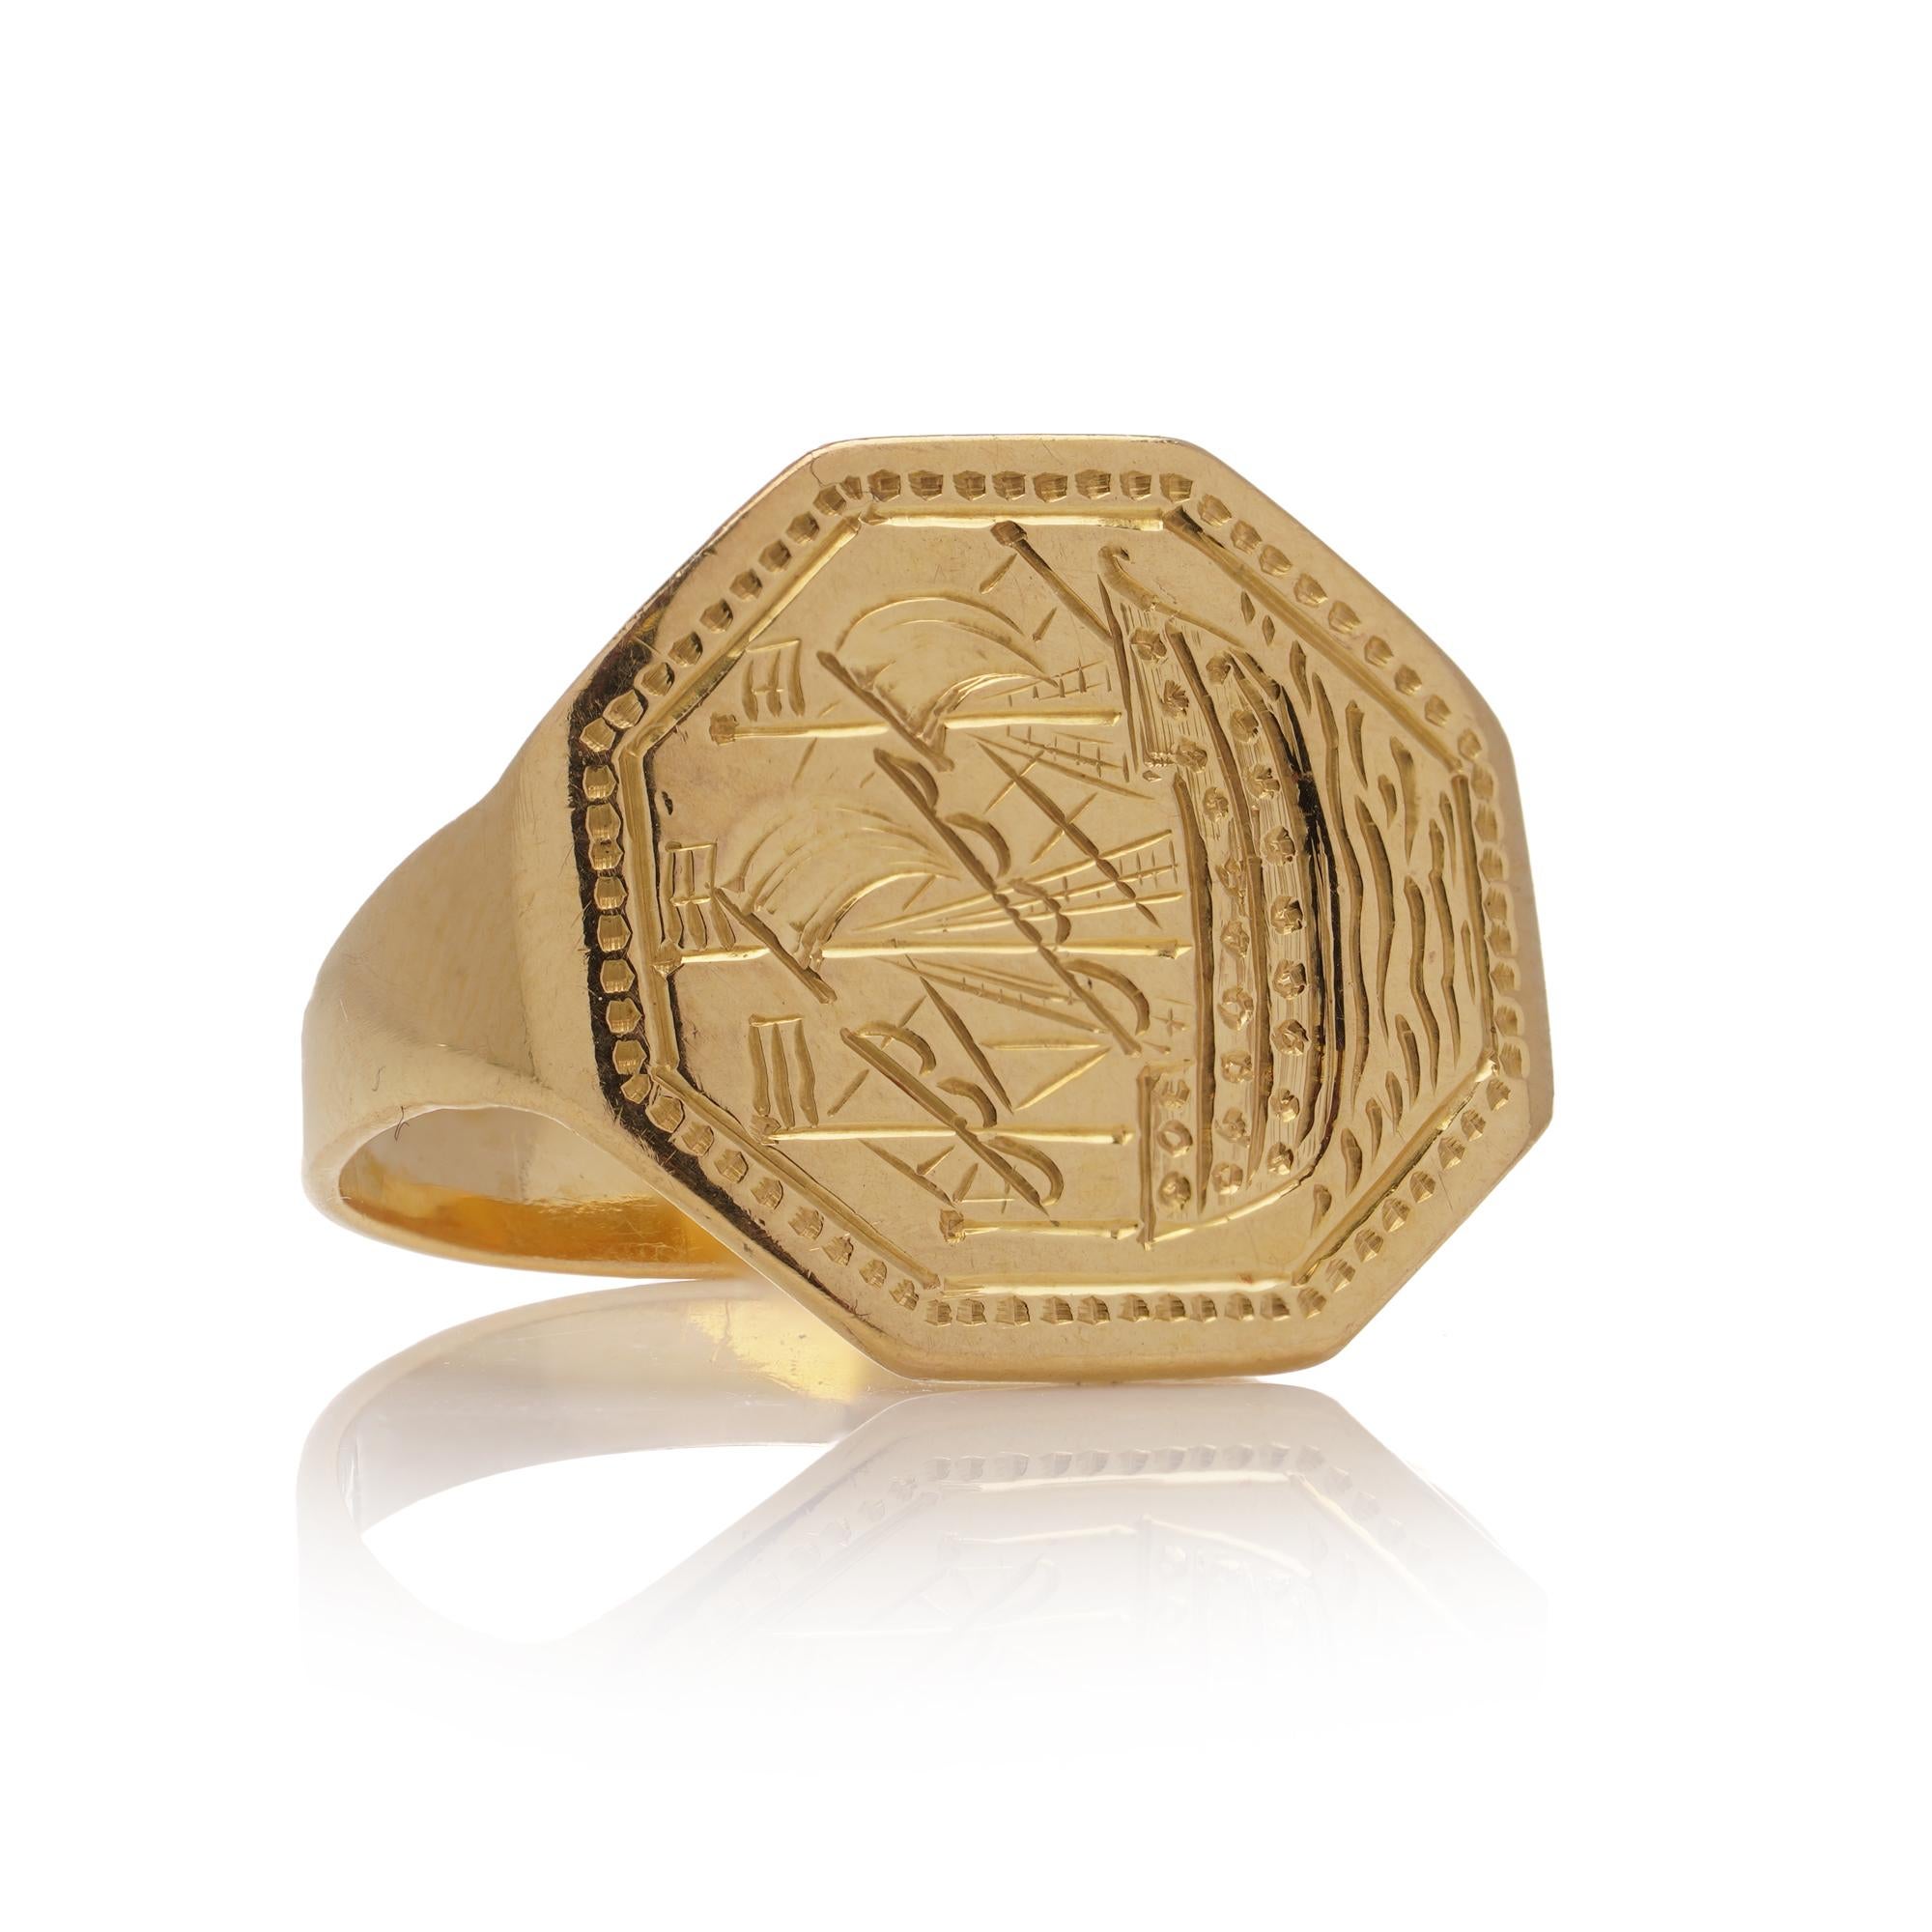 Vintage 22kt. yellow gold signet ring featuring the man-of-war ship. 
Made in England, Sheffield, 1983
Maker: DB ( Unidentified )                                                                                                                        